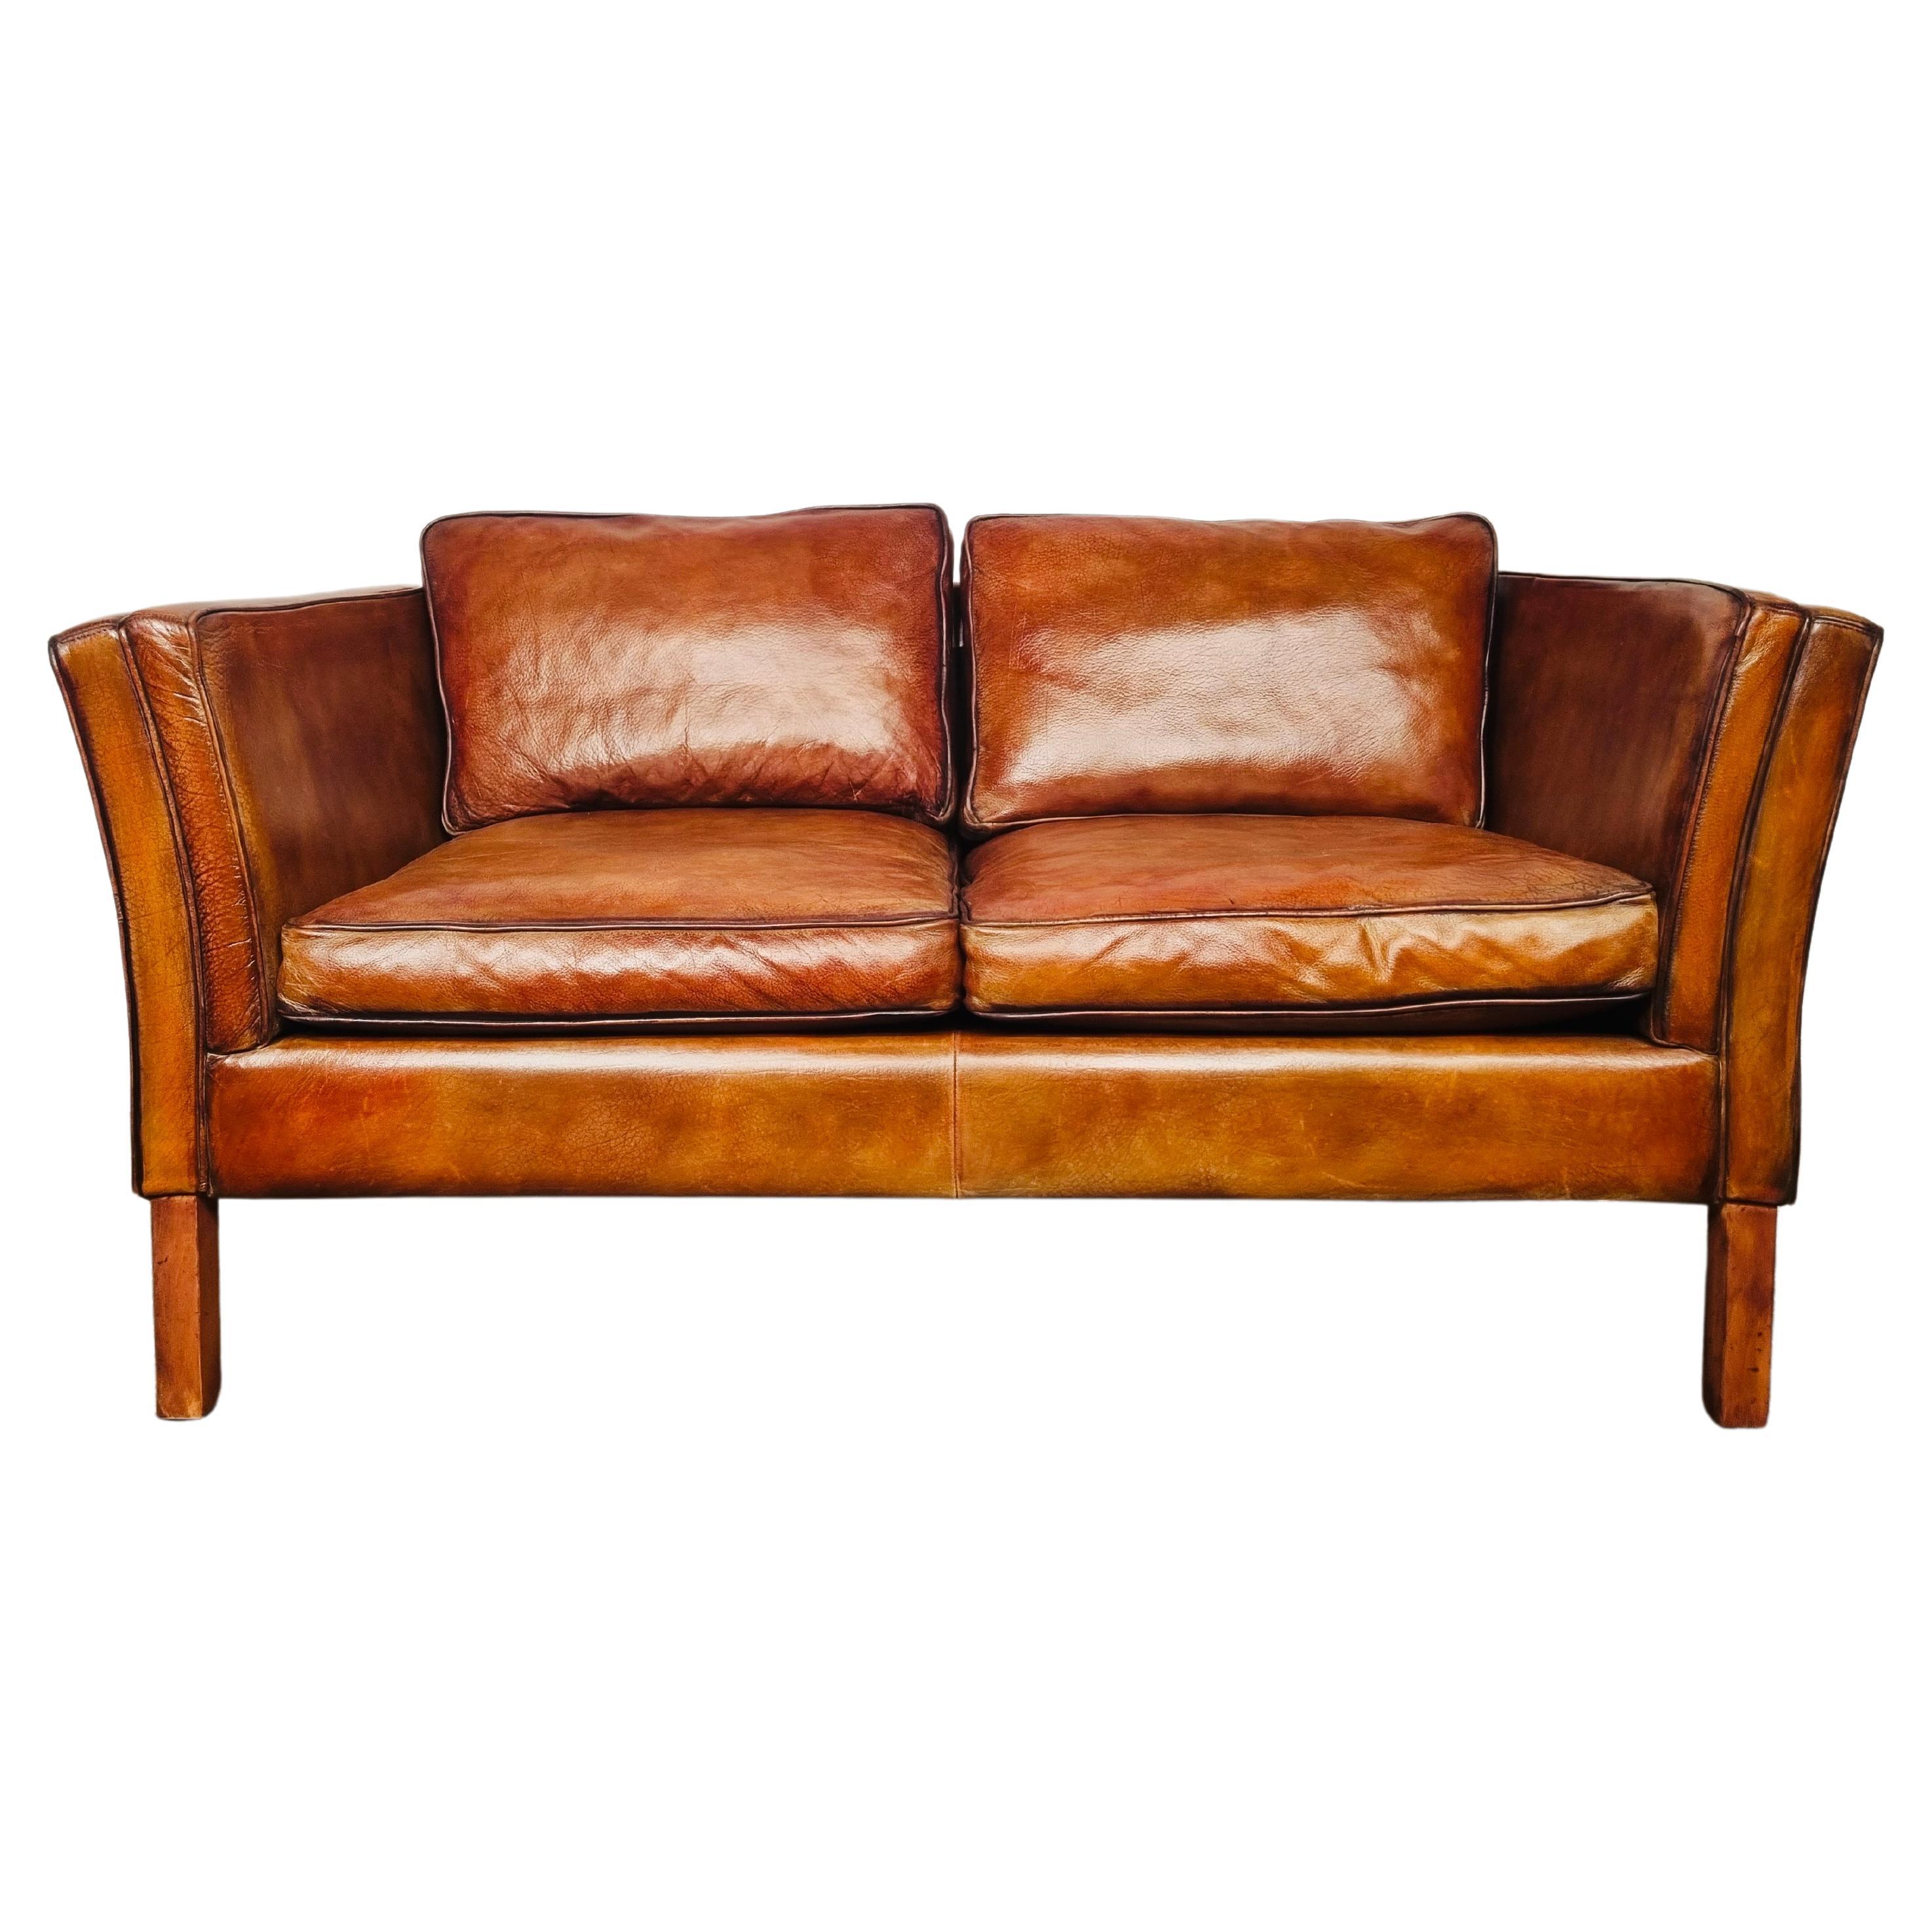 Neat Vintage Danish 70s Patinated Light Tan Two Seater Leather Sofa #679  For Sale at 1stDibs | vintage tan leather sofa